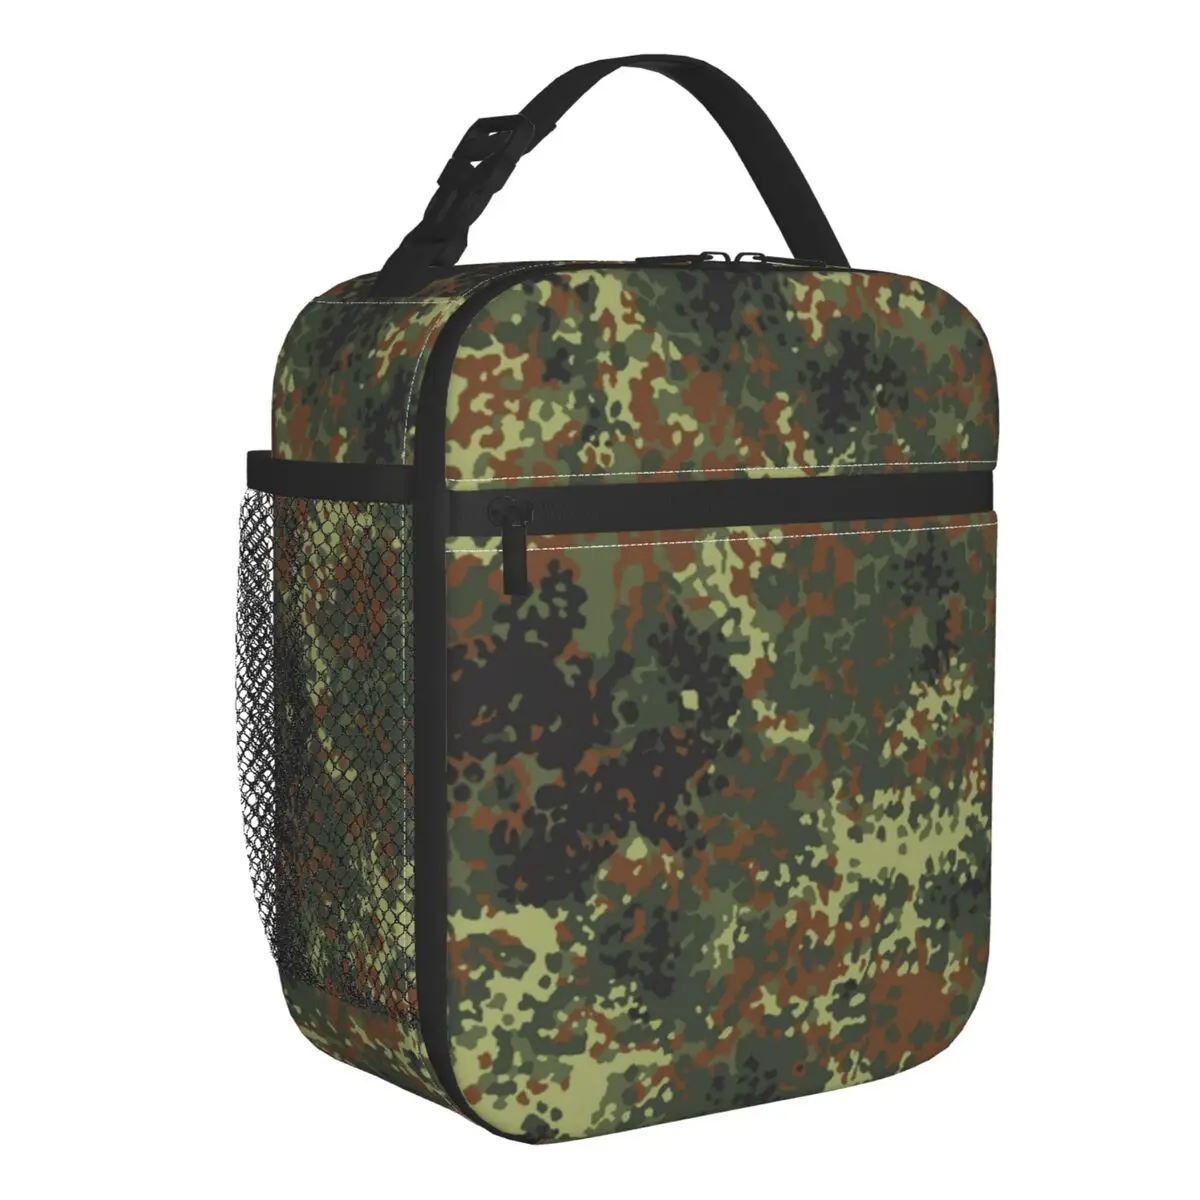 

Camo Resuable Lunch Box Leakproof Military Camouflage Thermal Cooler Food Insulated Lunch Bag School Student